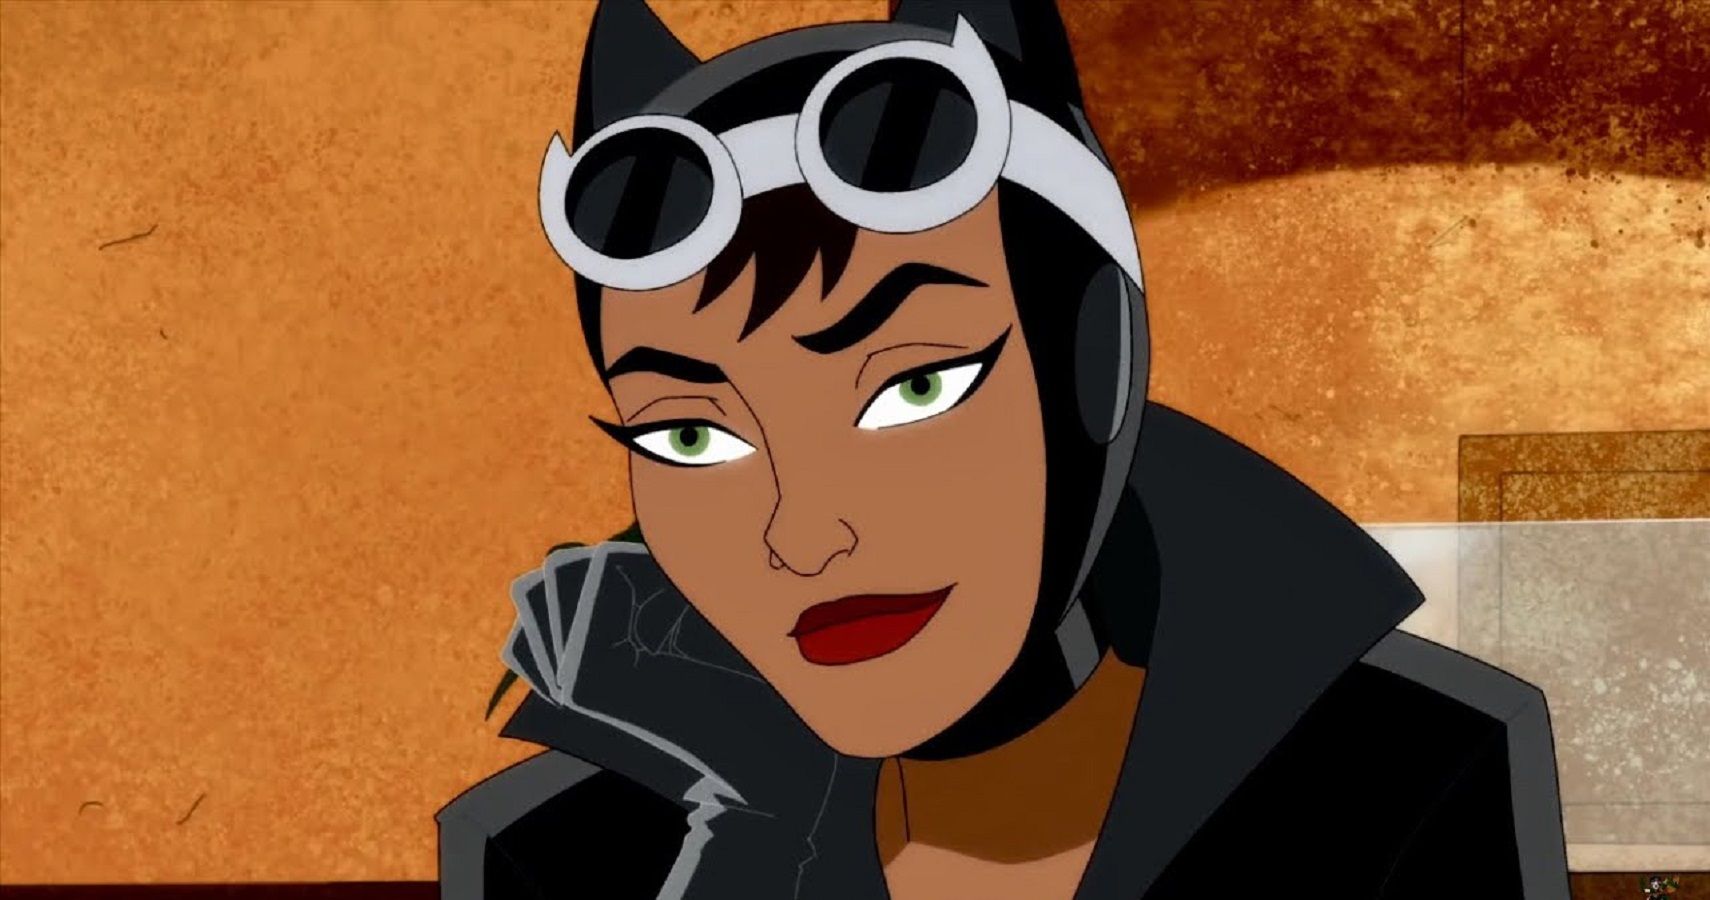 Catwoman in the Harley Quinn show